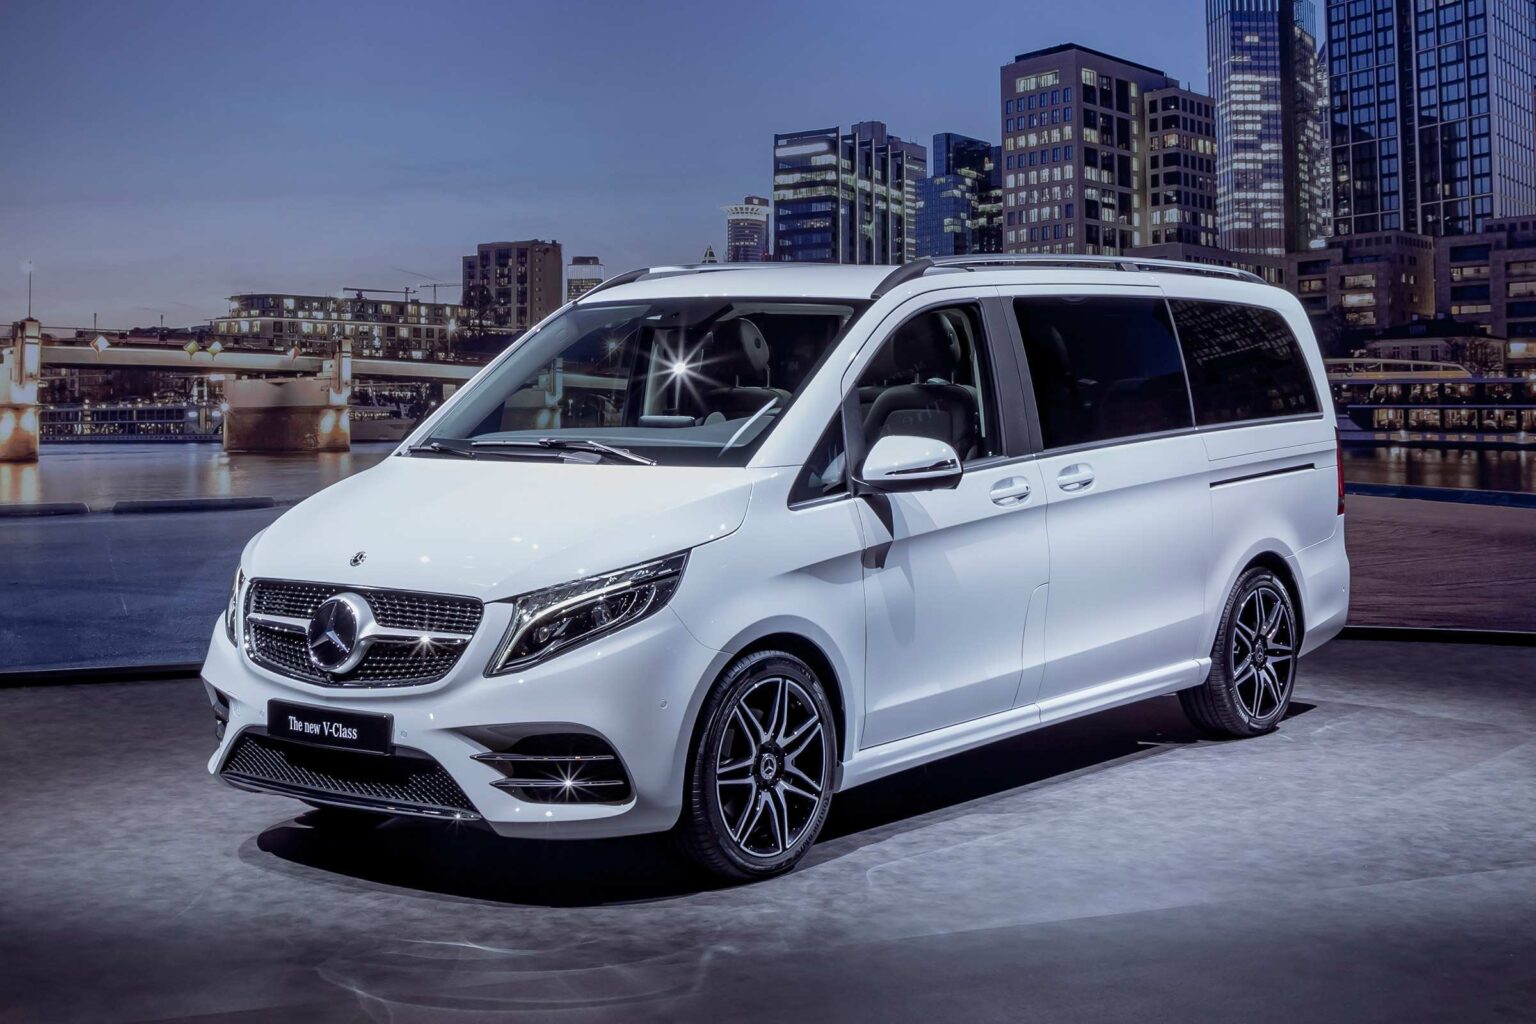 Mercedes V-Class Hire for the EFL Championship play-offs in Wembley